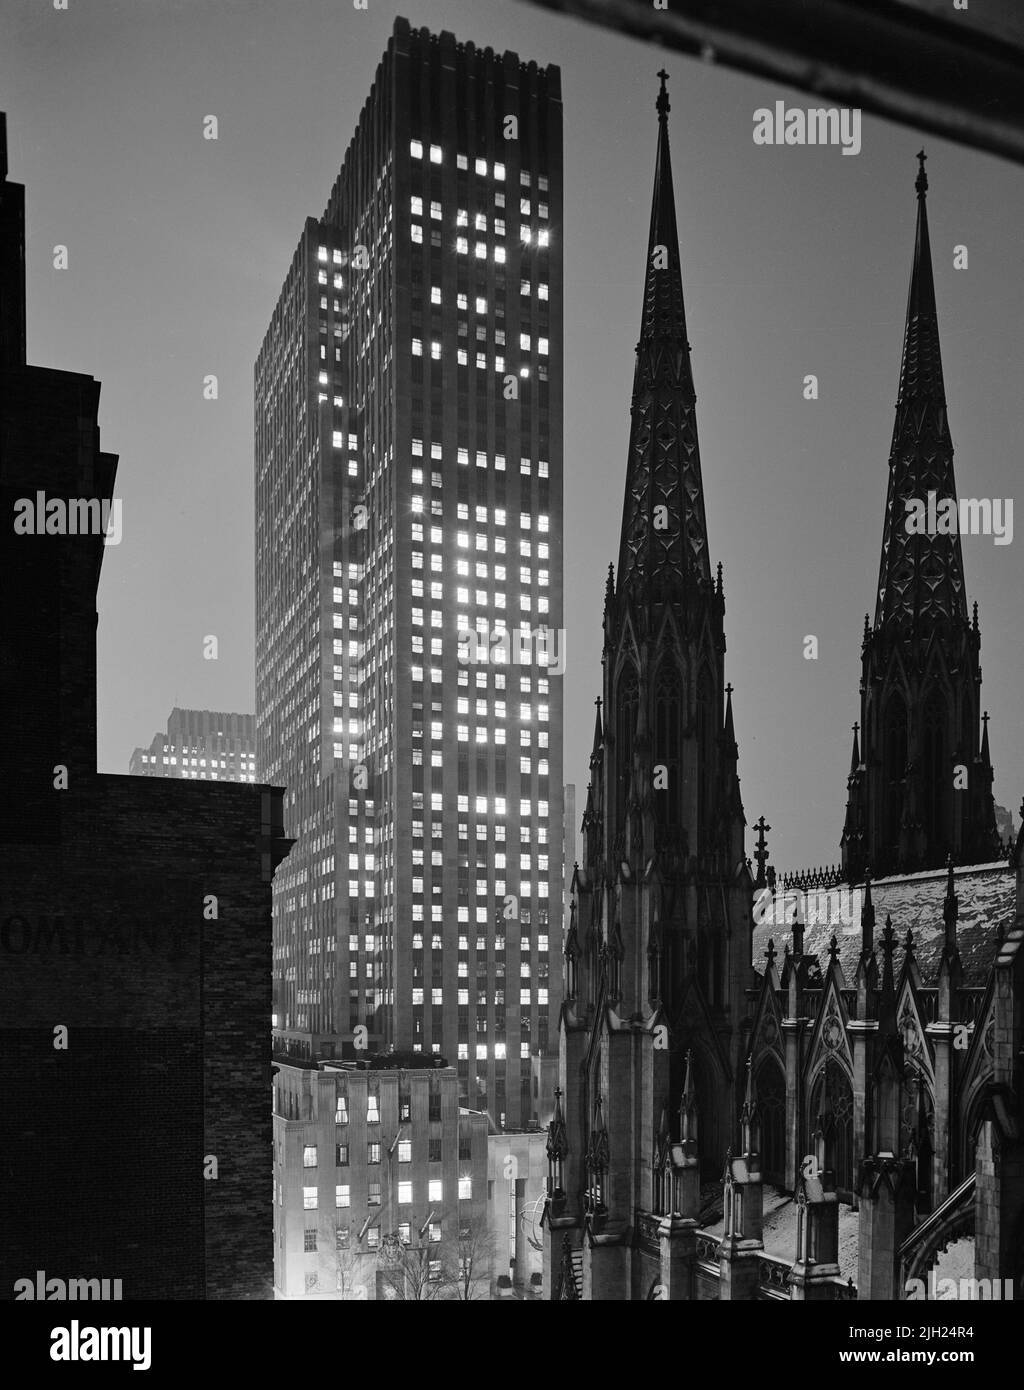 Cityscape at Night, view of Saint Patrick's Cathedral looking West, New York City, New York, USA, Gottscho-Schleisner Collection, 1940 Stock Photo